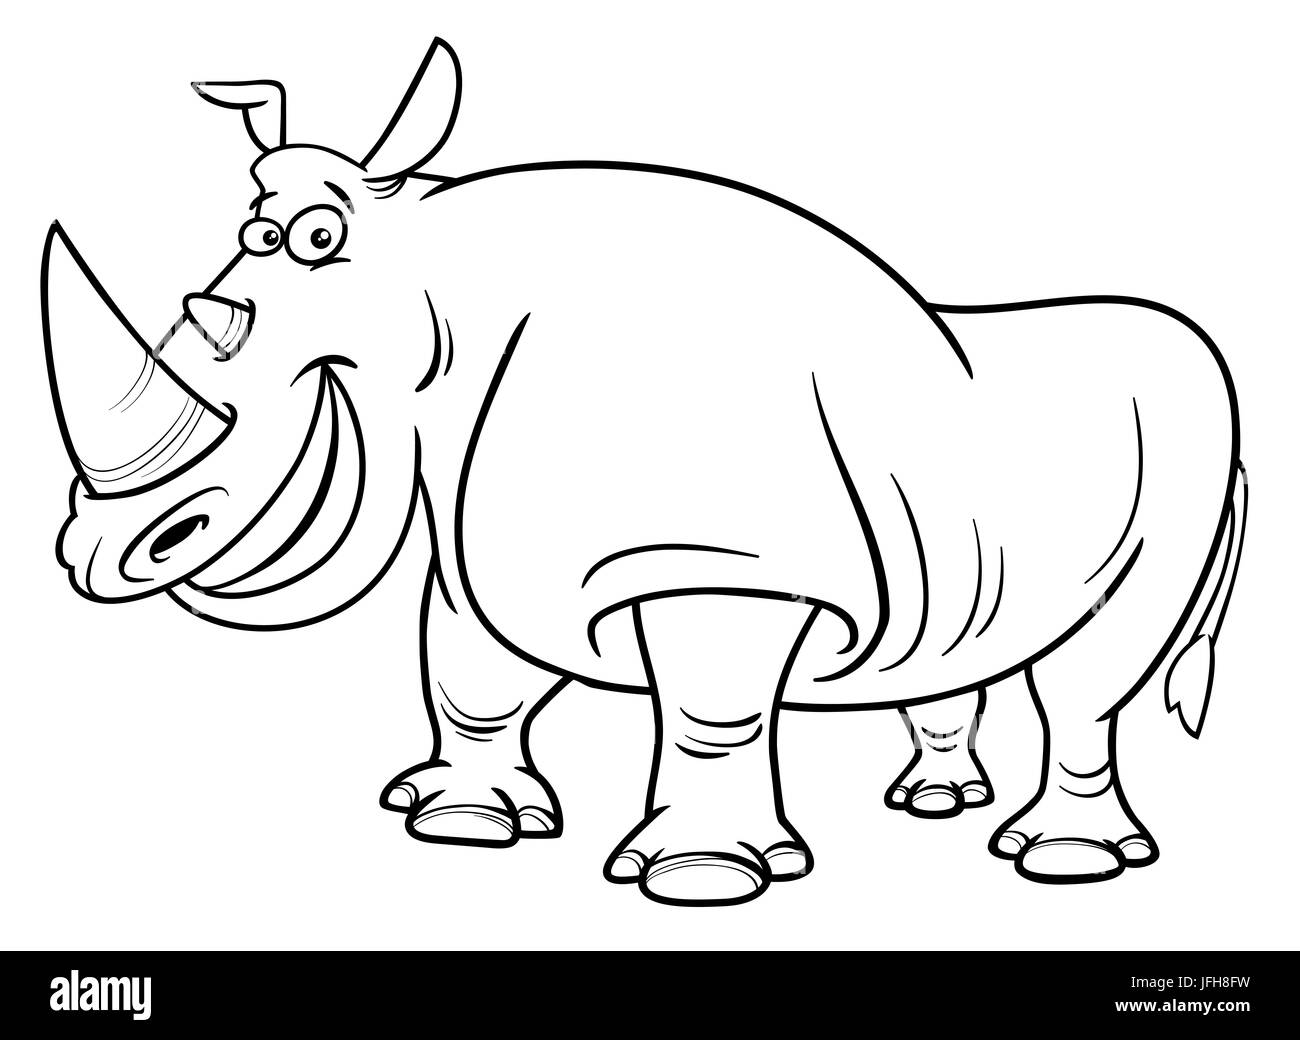 rhinoceros character coloring page Stock Photo